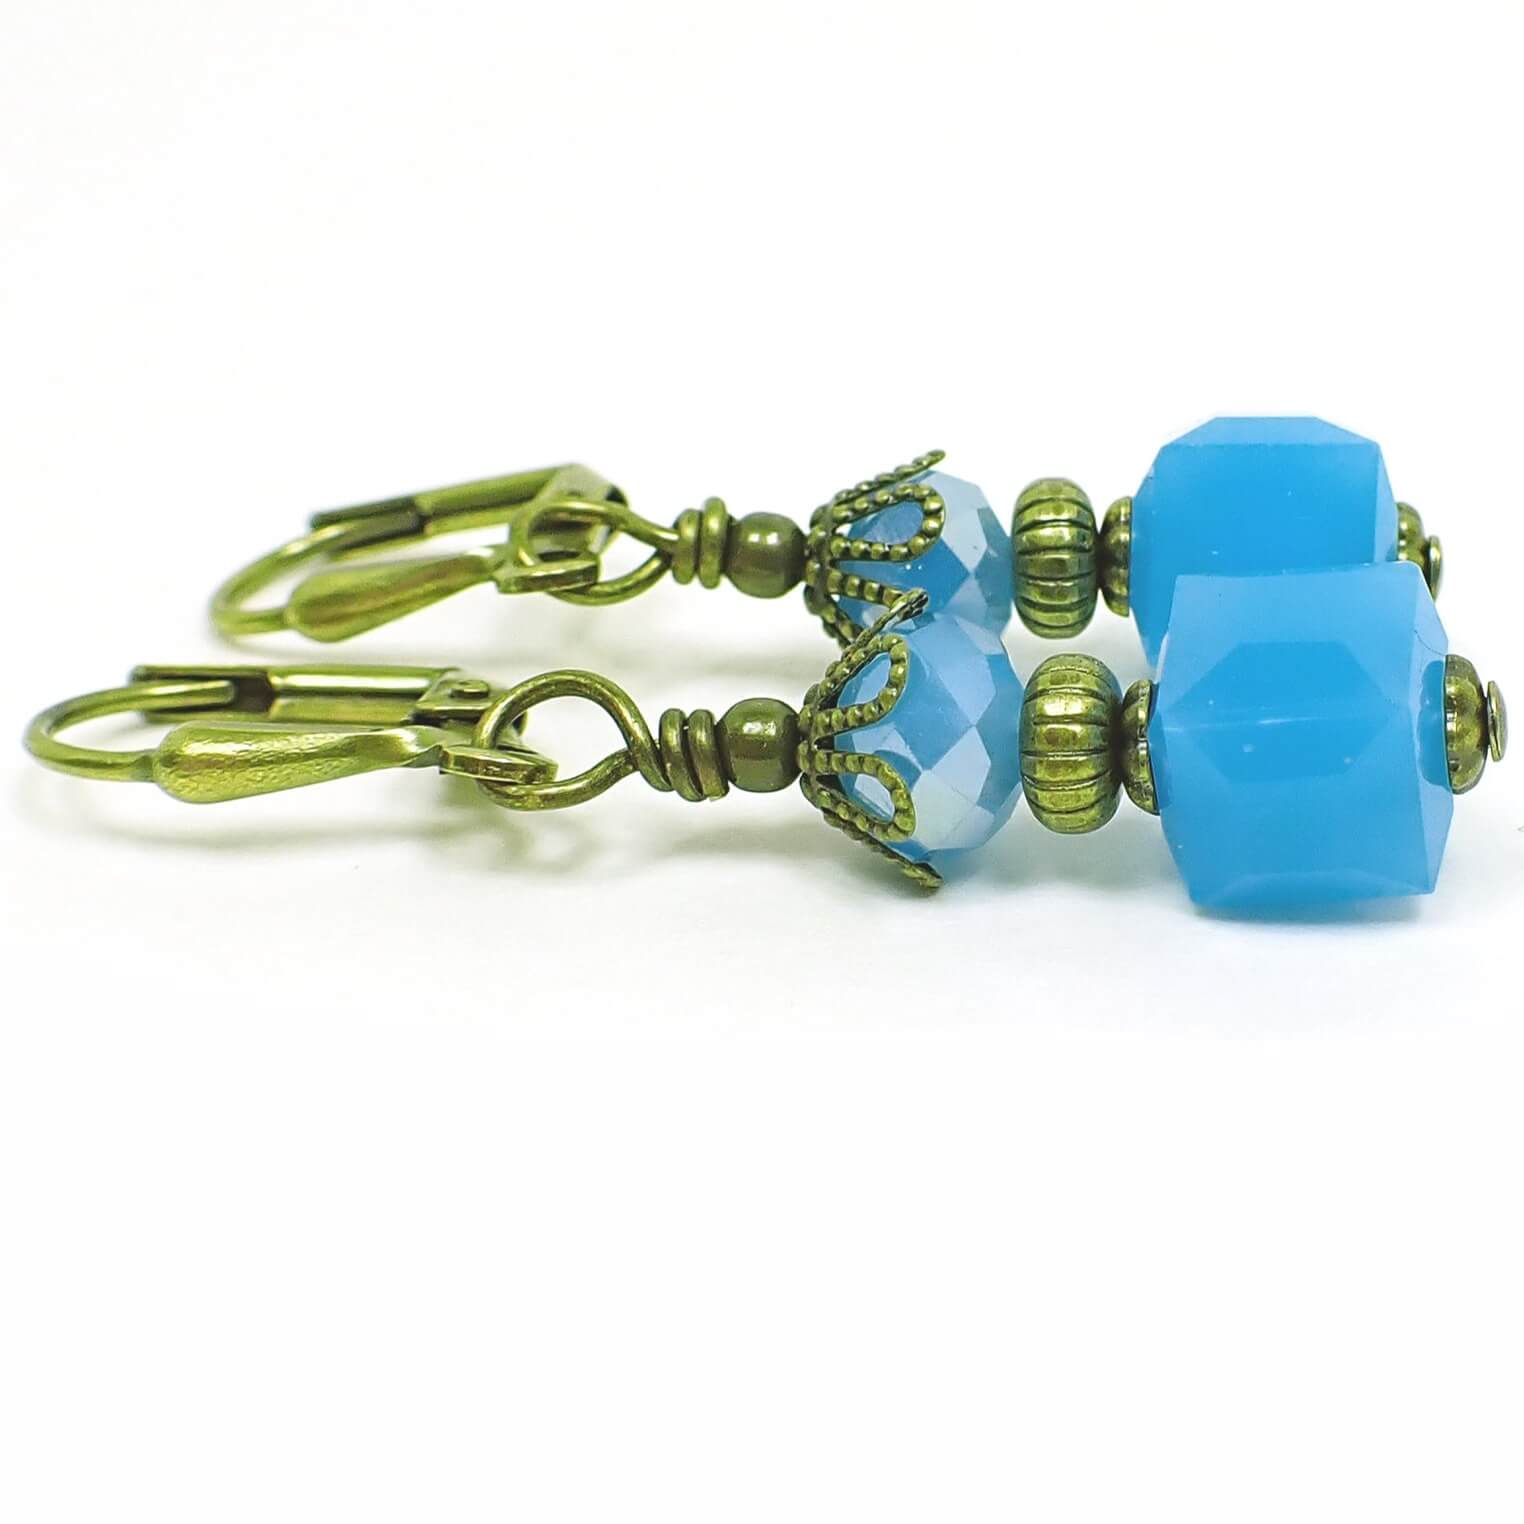 Side view of the small glass beaded earrings. The metal is antiqued brass in color. There are faceted glass crystal rondelle beads at the top and small cube shaped glass beads at the bottom. The beads are mint blue in color.